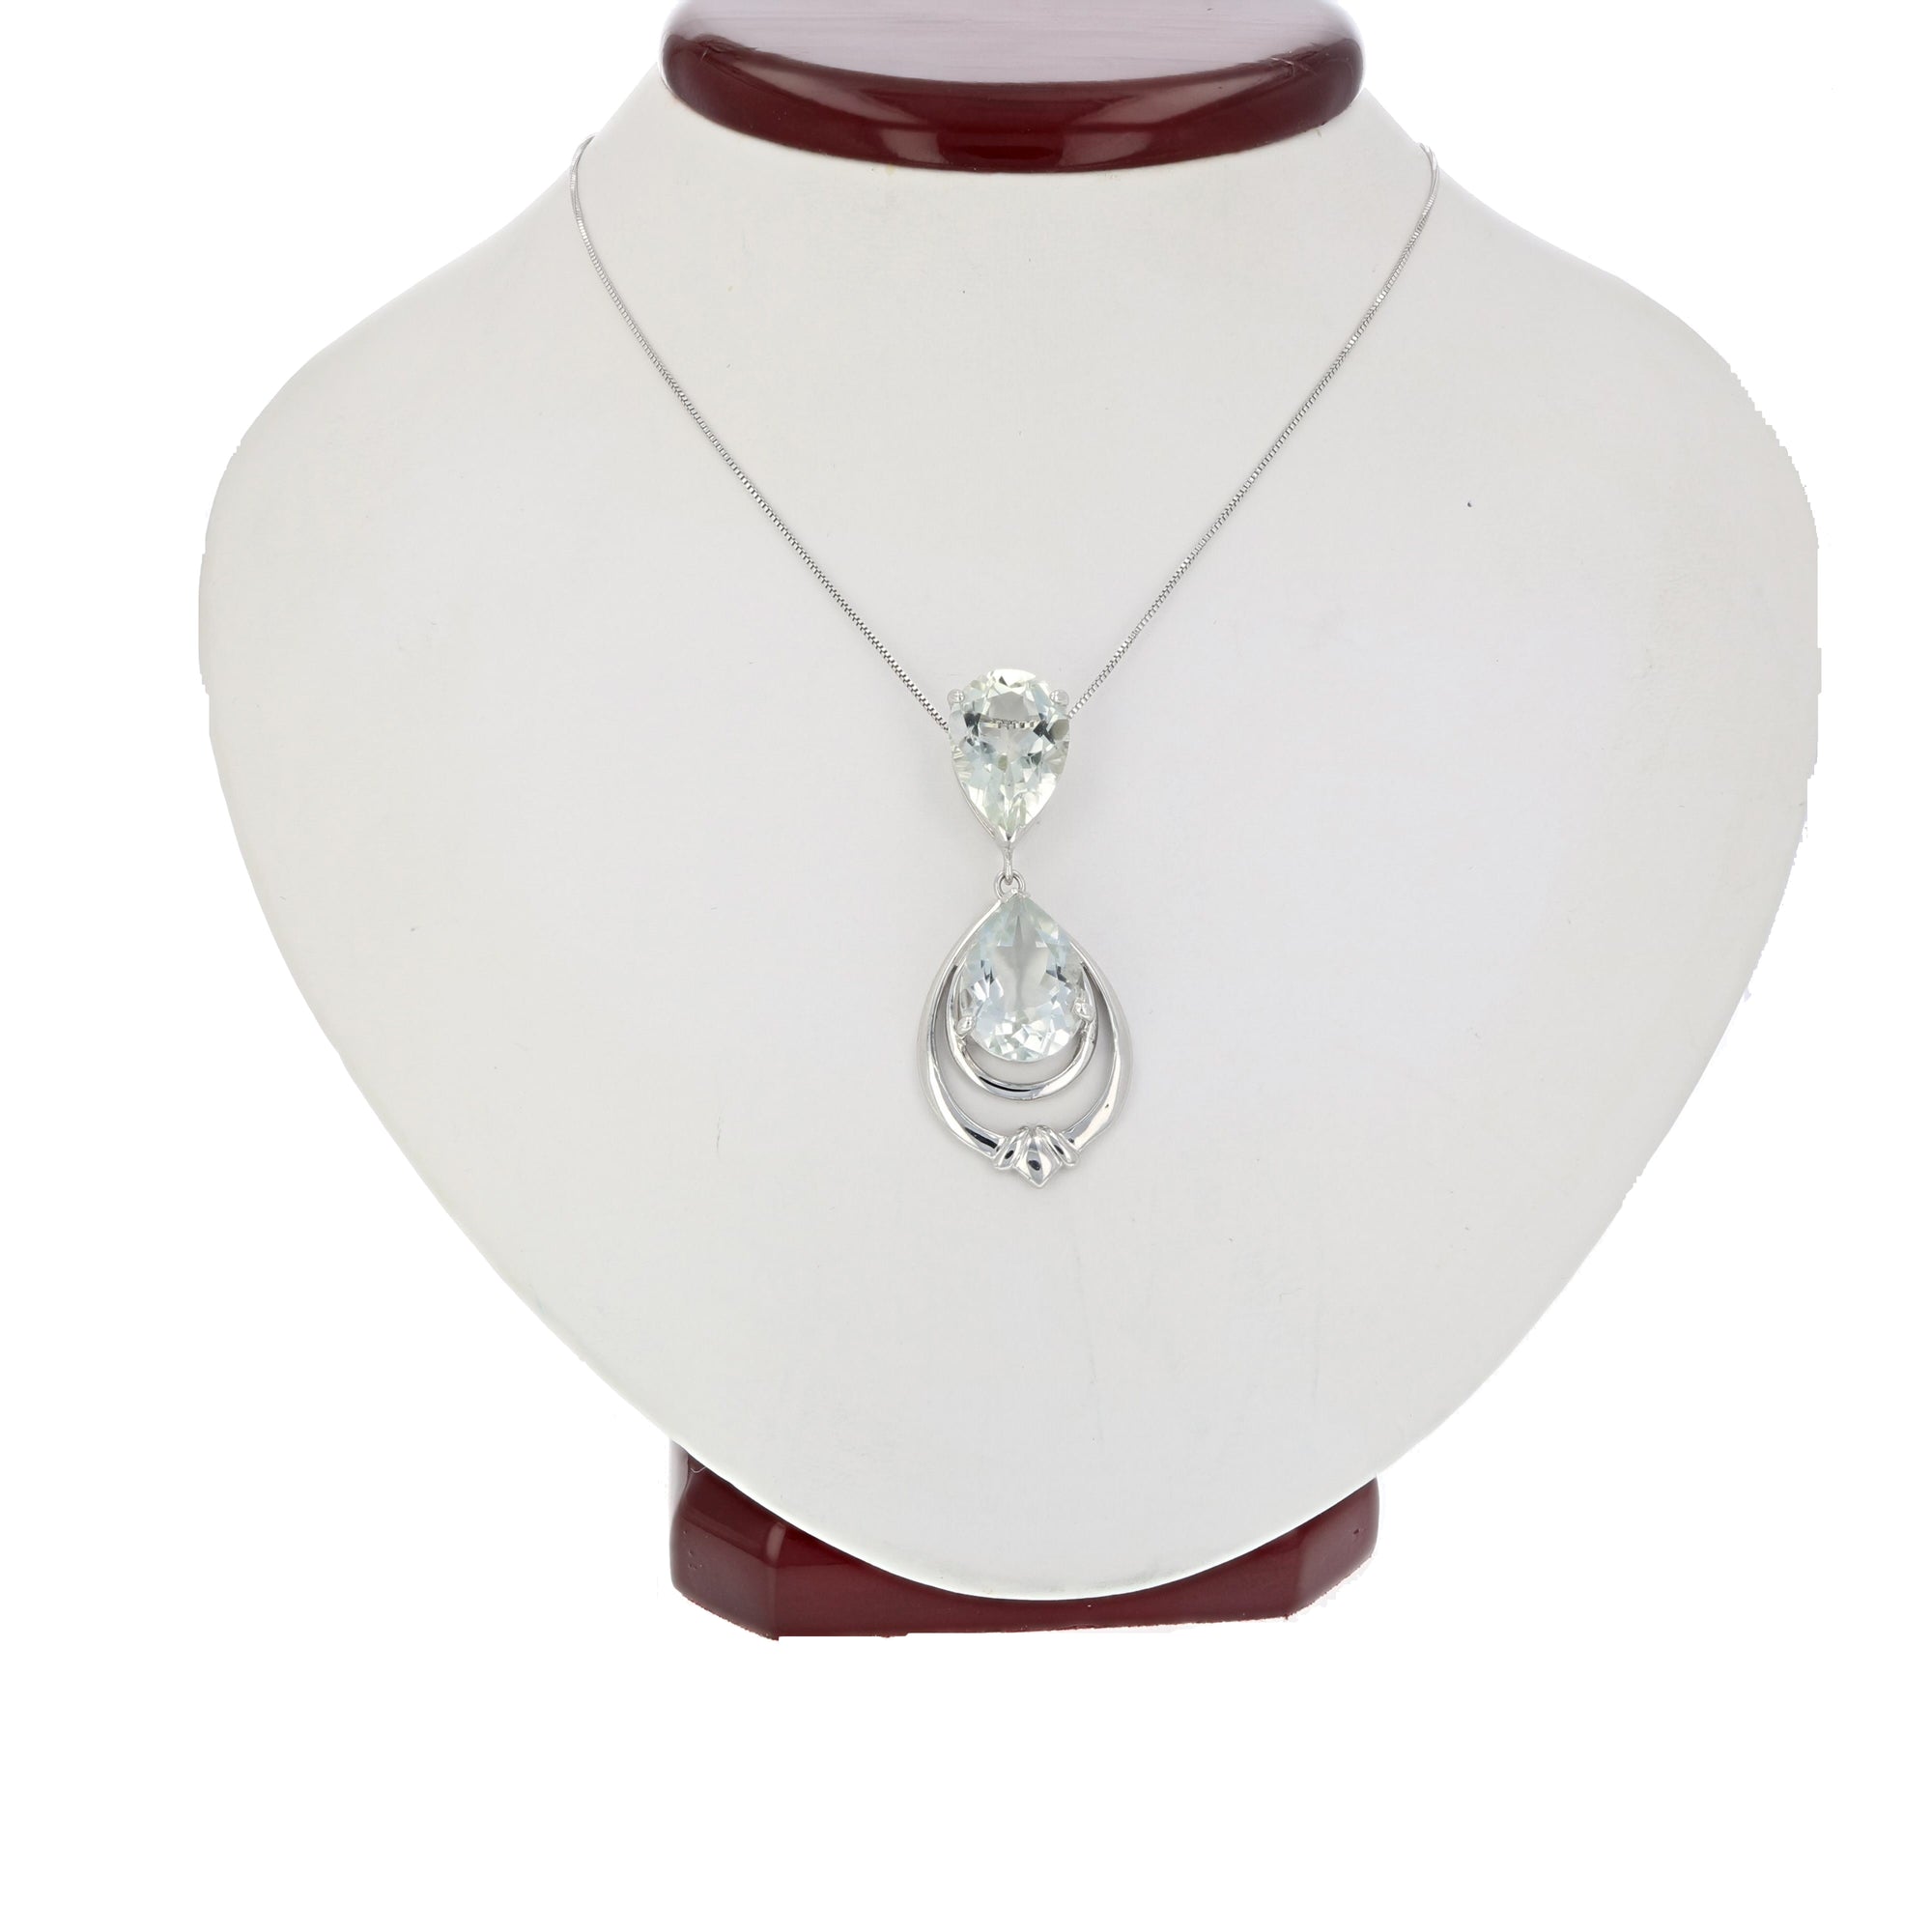 3 cttw Green Amethyst Pendant .925 Sterling Silver With 18 Inch Chain included